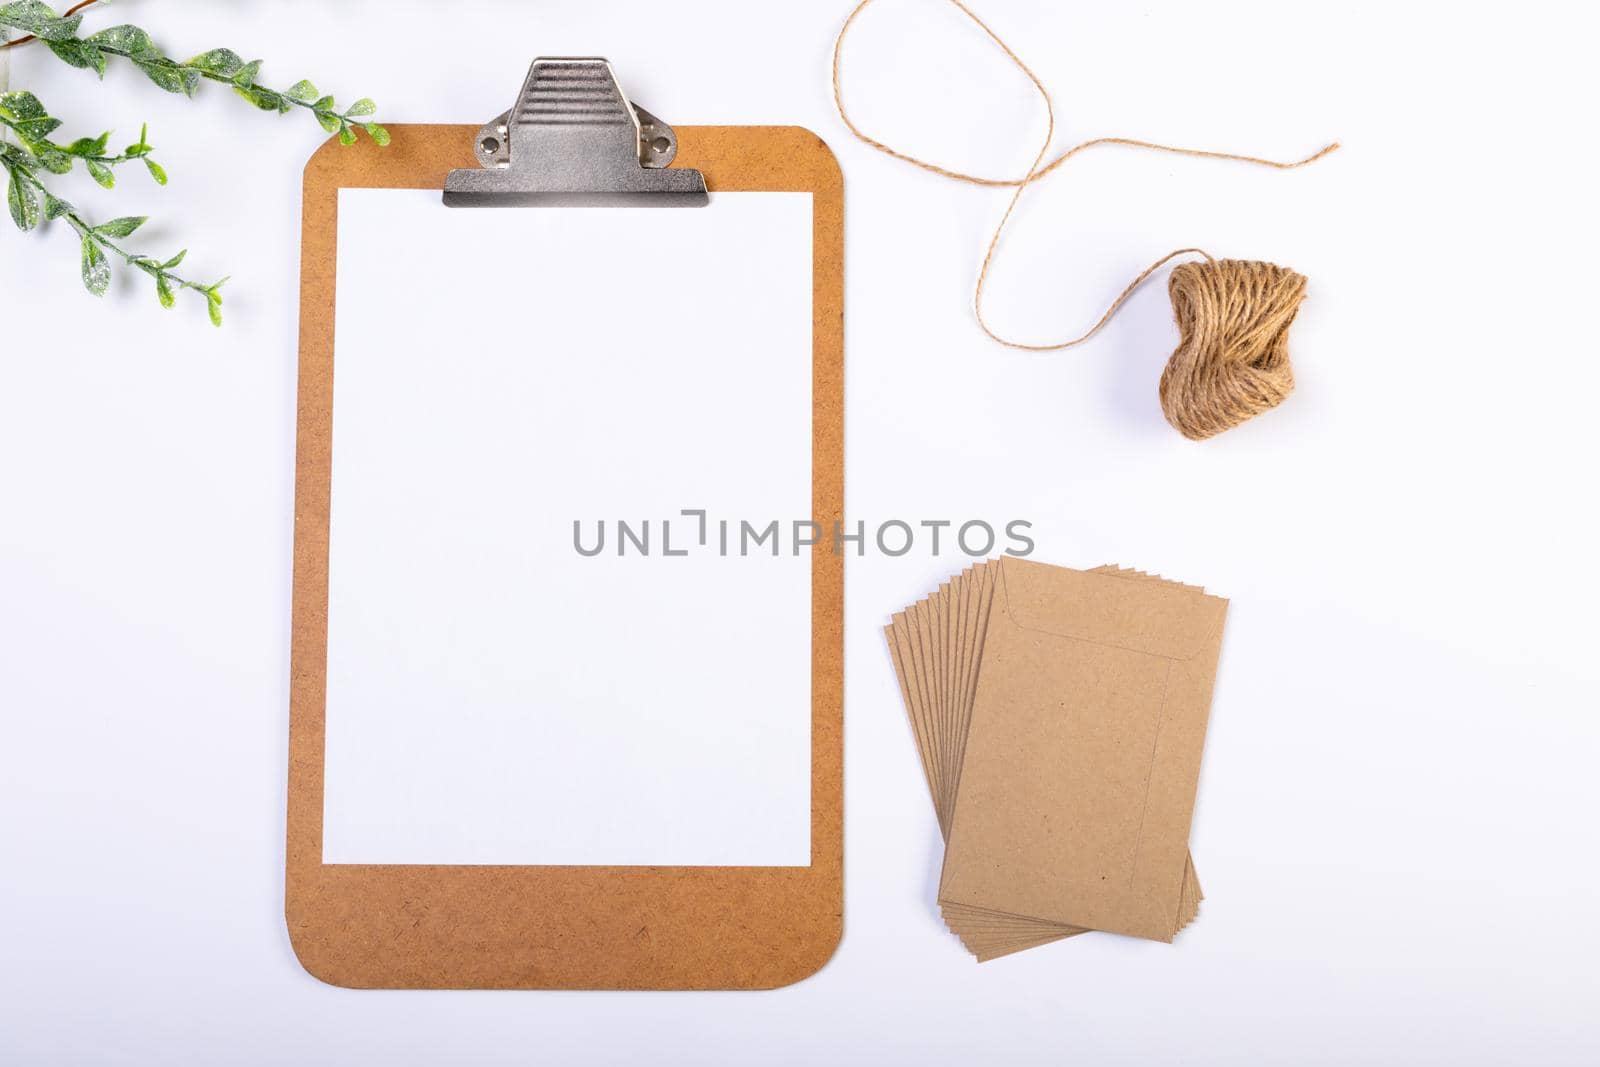 Composition of clipboard with copy space and envelopes, string, branches on white background. christmas, tradition and celebration concept.